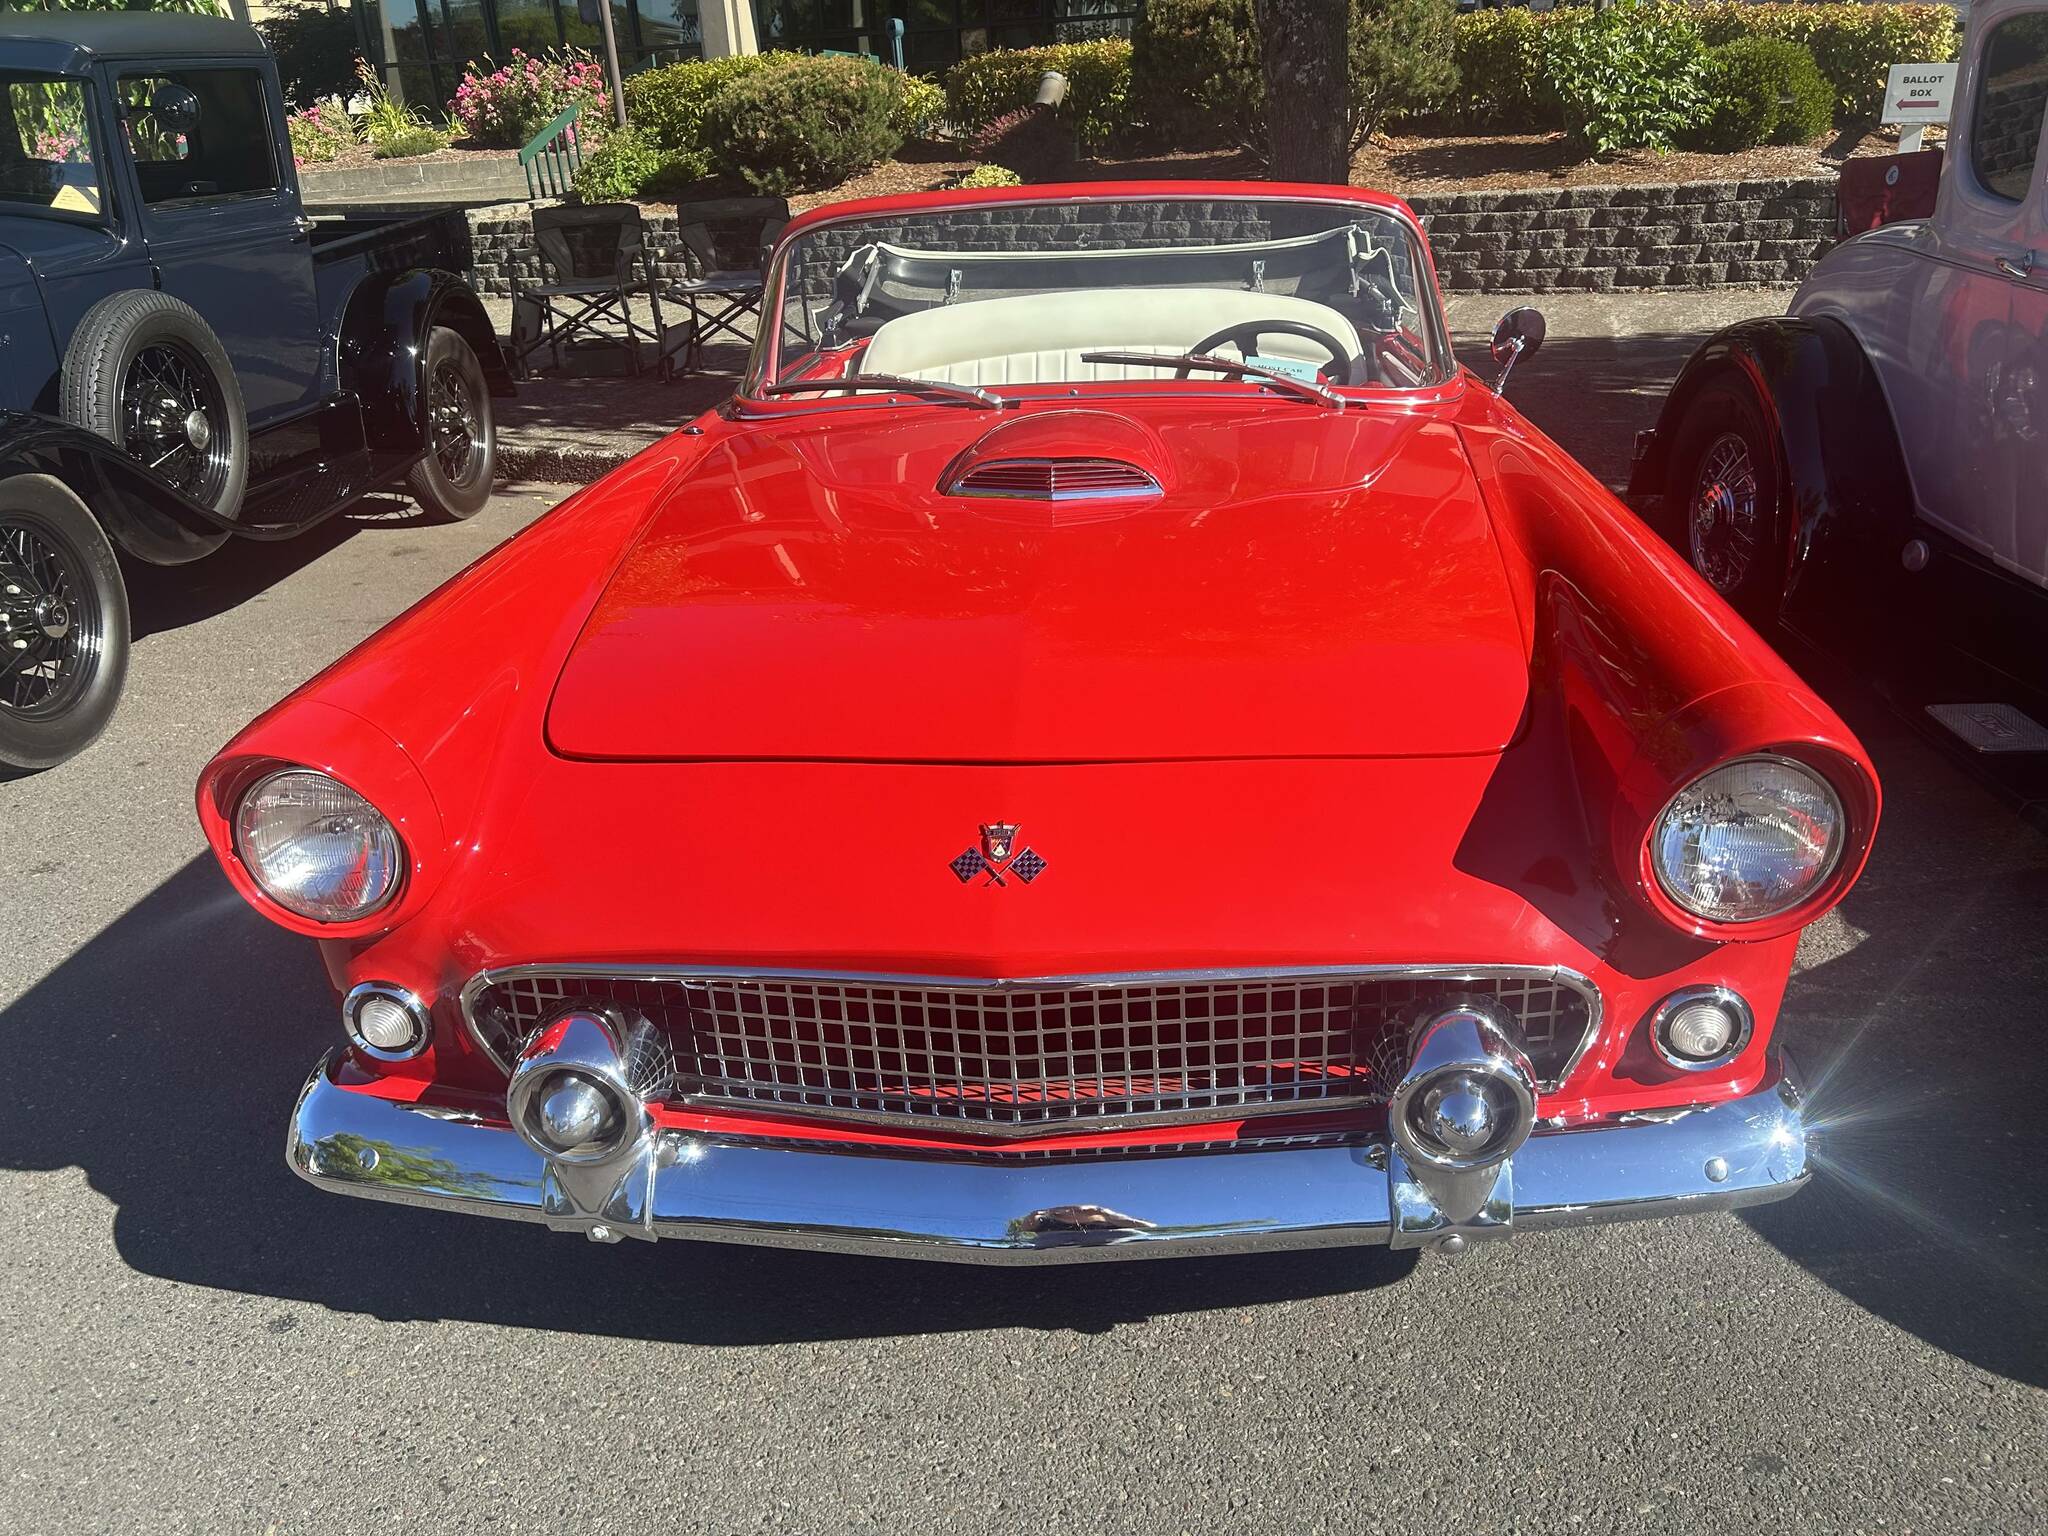 Lillian Saeger / The Daily World
The vibrant red 1955 Thunderbird was one of the many eye-catching automobiles on display during this years Historic Montesano Car Show on July 15.